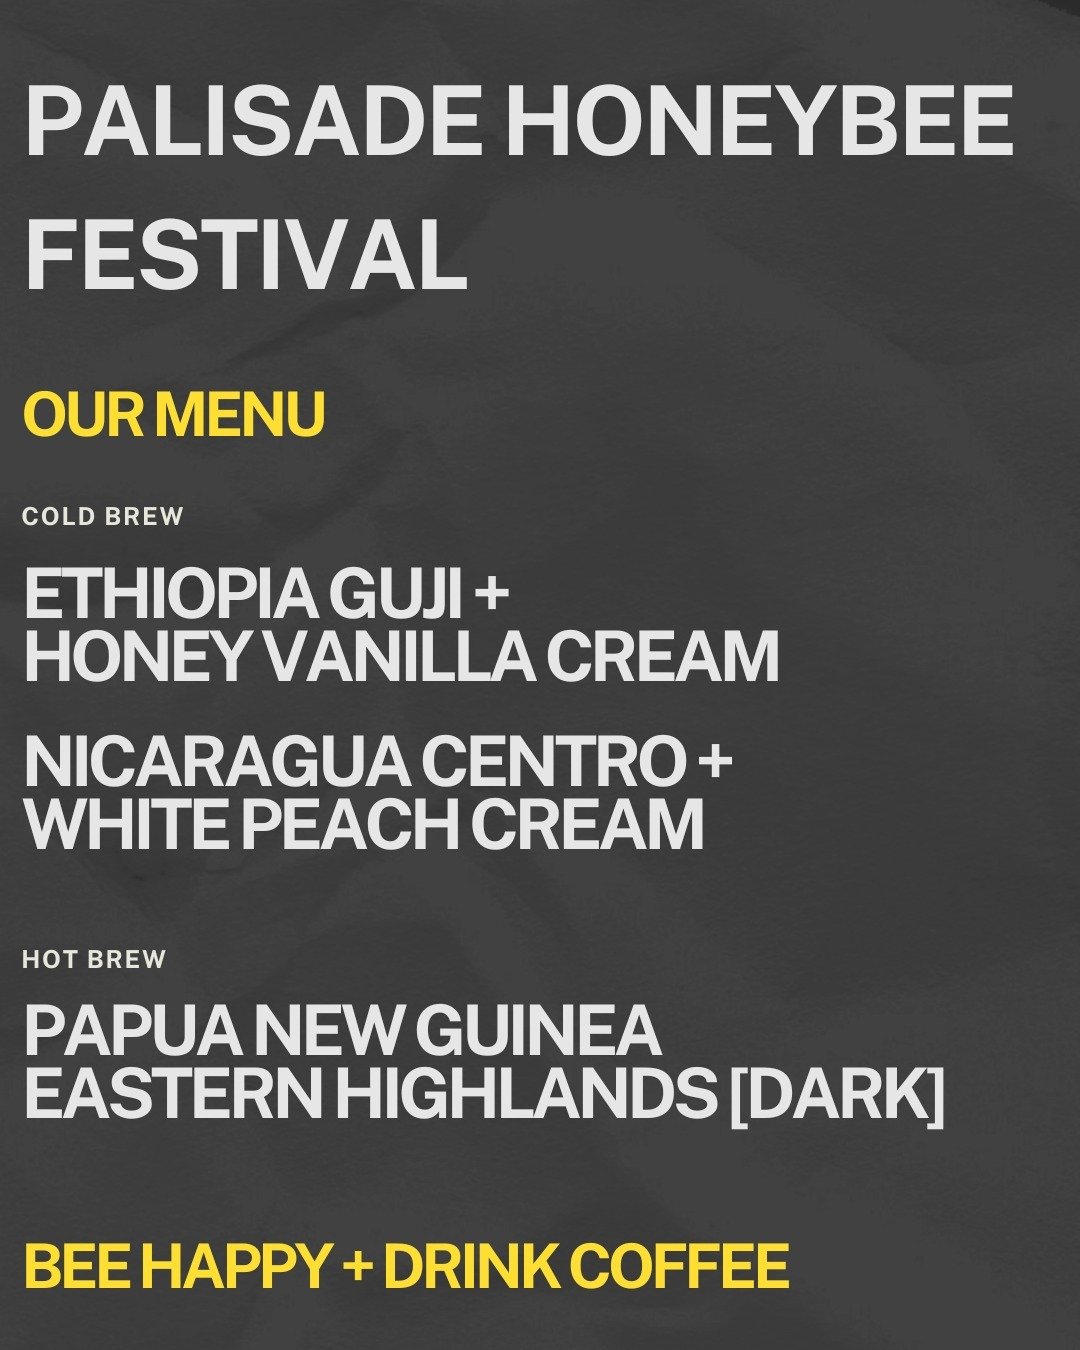 🐝 Bee-autiful sips await.
Tomorrow 10am - 4pm ... we'll see you downtown Palisade for the wonderful International Honeybee Festival.

Featuring the launch of our newest single-origin offering: Ethiopia Guji Highlands. Find sweet lemon drop sips with